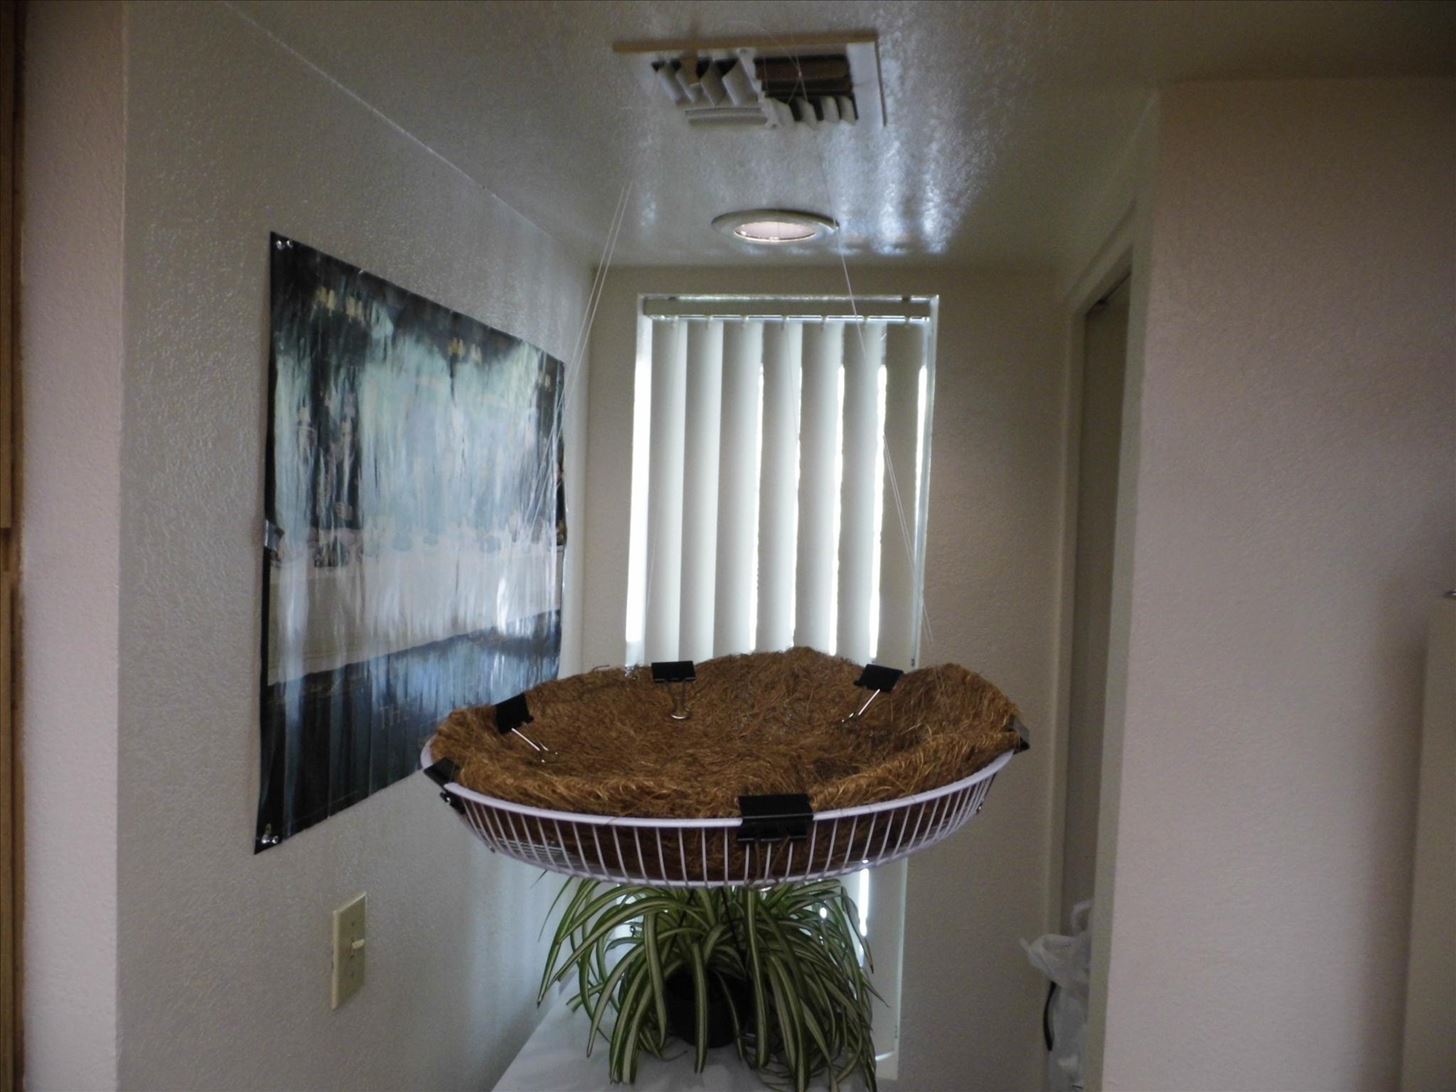 How to Turn an Old Fan Grille into a Decorative Plant Hanger